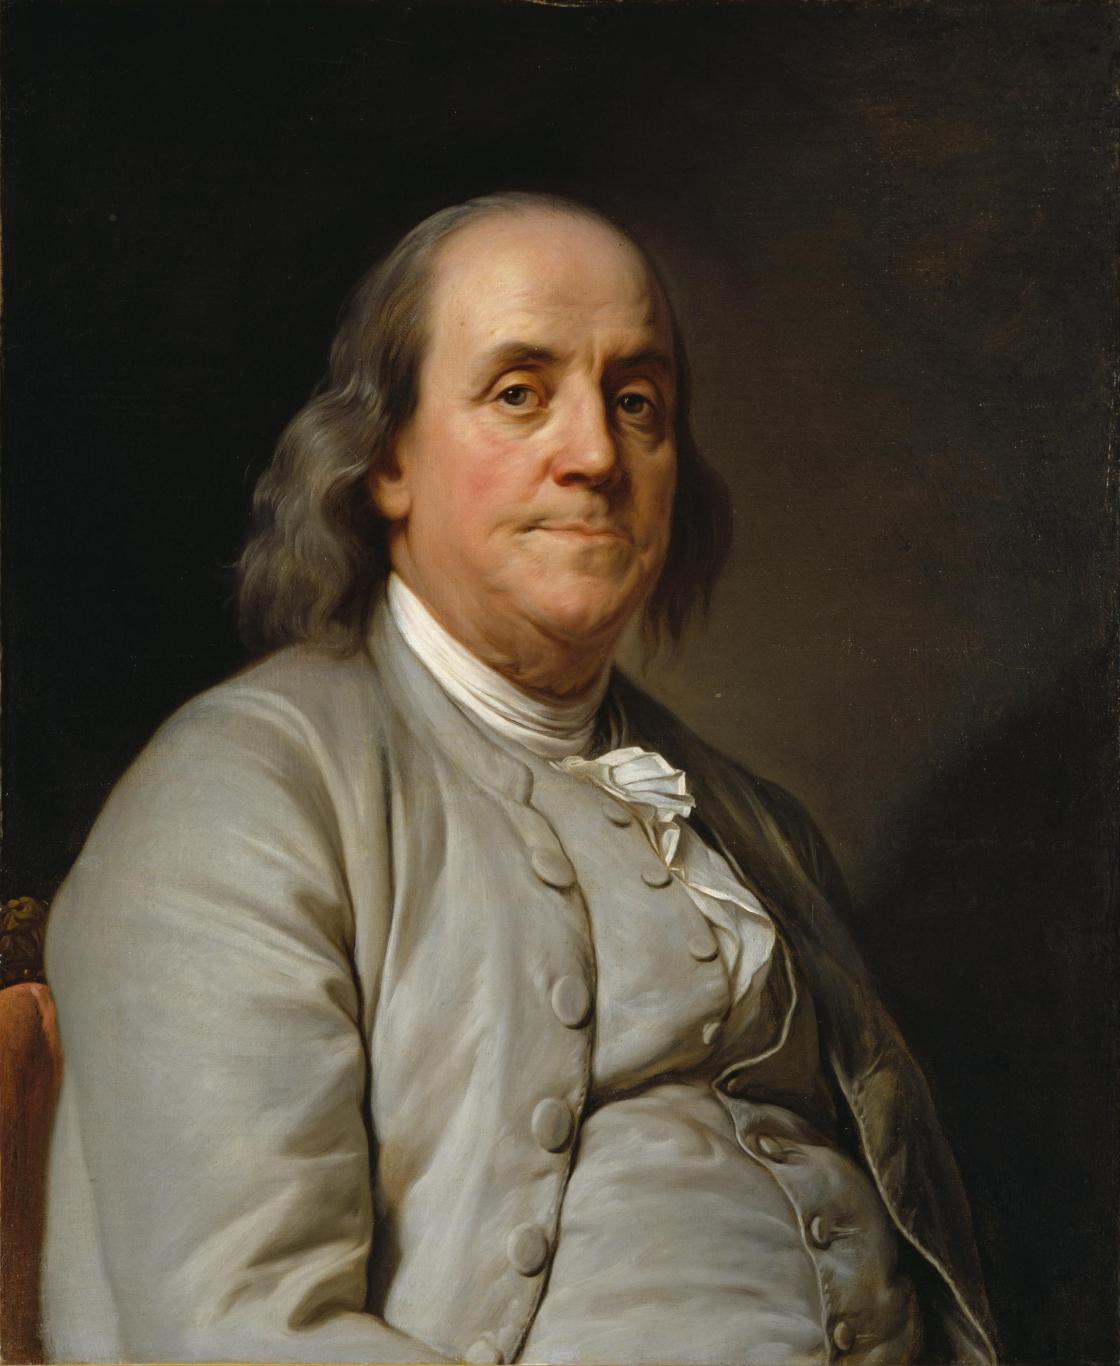 A portrait of Benjamin Franklin by Joseph-Siffred Duplessis